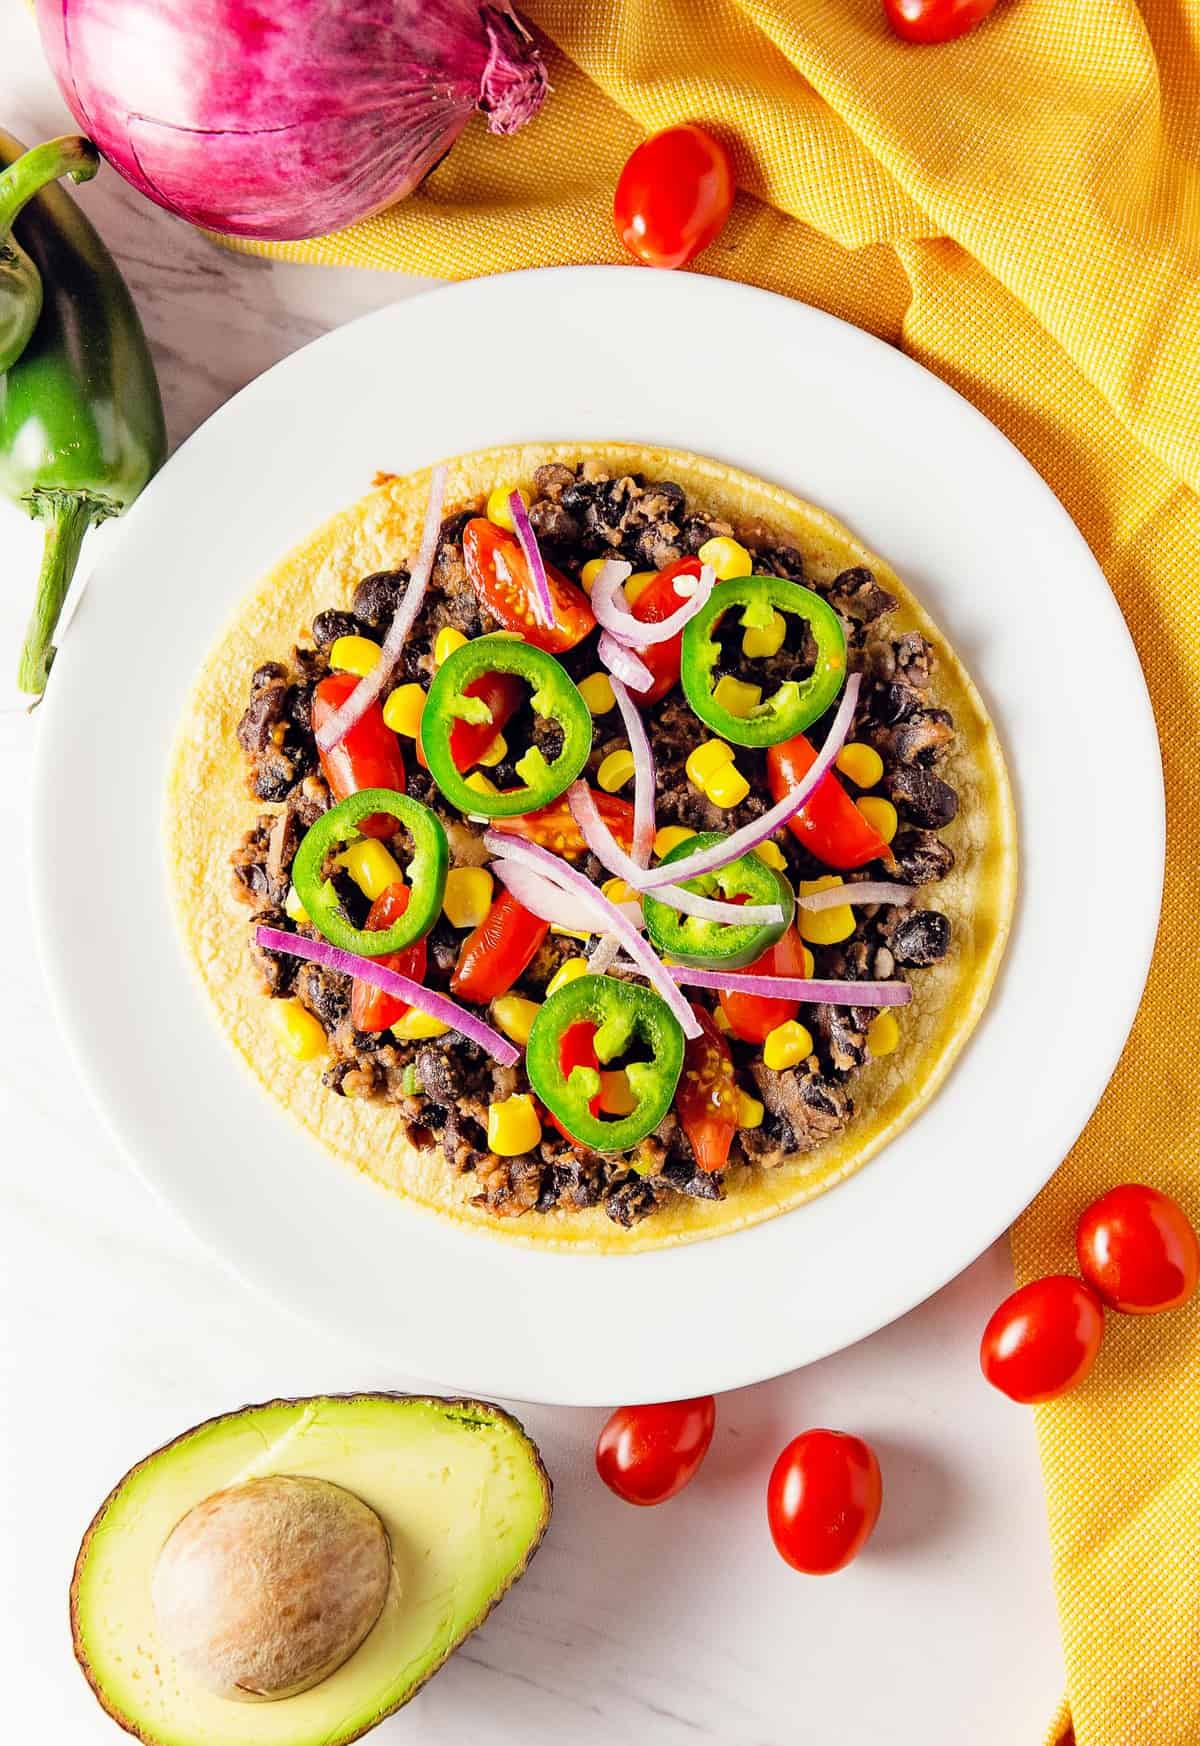 quesadilla, spicy black beans, dairy free quesadilla, whole food plant based quesadilla, recipe, quesadilla recipe, dairy free quesadilla recipe, vegan, vegan recipe, whole food plant based recipe, whole food plant based, vegetarian, vegetarian recipe, gluten free, gluten free recipe, vegan dinner, vegan lunch, vegan meals, vegetarian dinner, vegetarian lunch, vegetarian meal, whole food plant based dinner, whole food plant based lunch, whole food plant based meal, gluten free dinner, gluten free lunch, gluten free meal, healthy, oil free, no oil, red onions, corn, black beans, green onions, tomatoes, jalapeño, quick dinner, fast dinner, entertaining, wfpb, dairy free, no dairy, traditional, Mexican, Southwestern, classic, delicious, the best, winter, fall, spring, summer, fast, easy, quick, simple, 30 minutes,